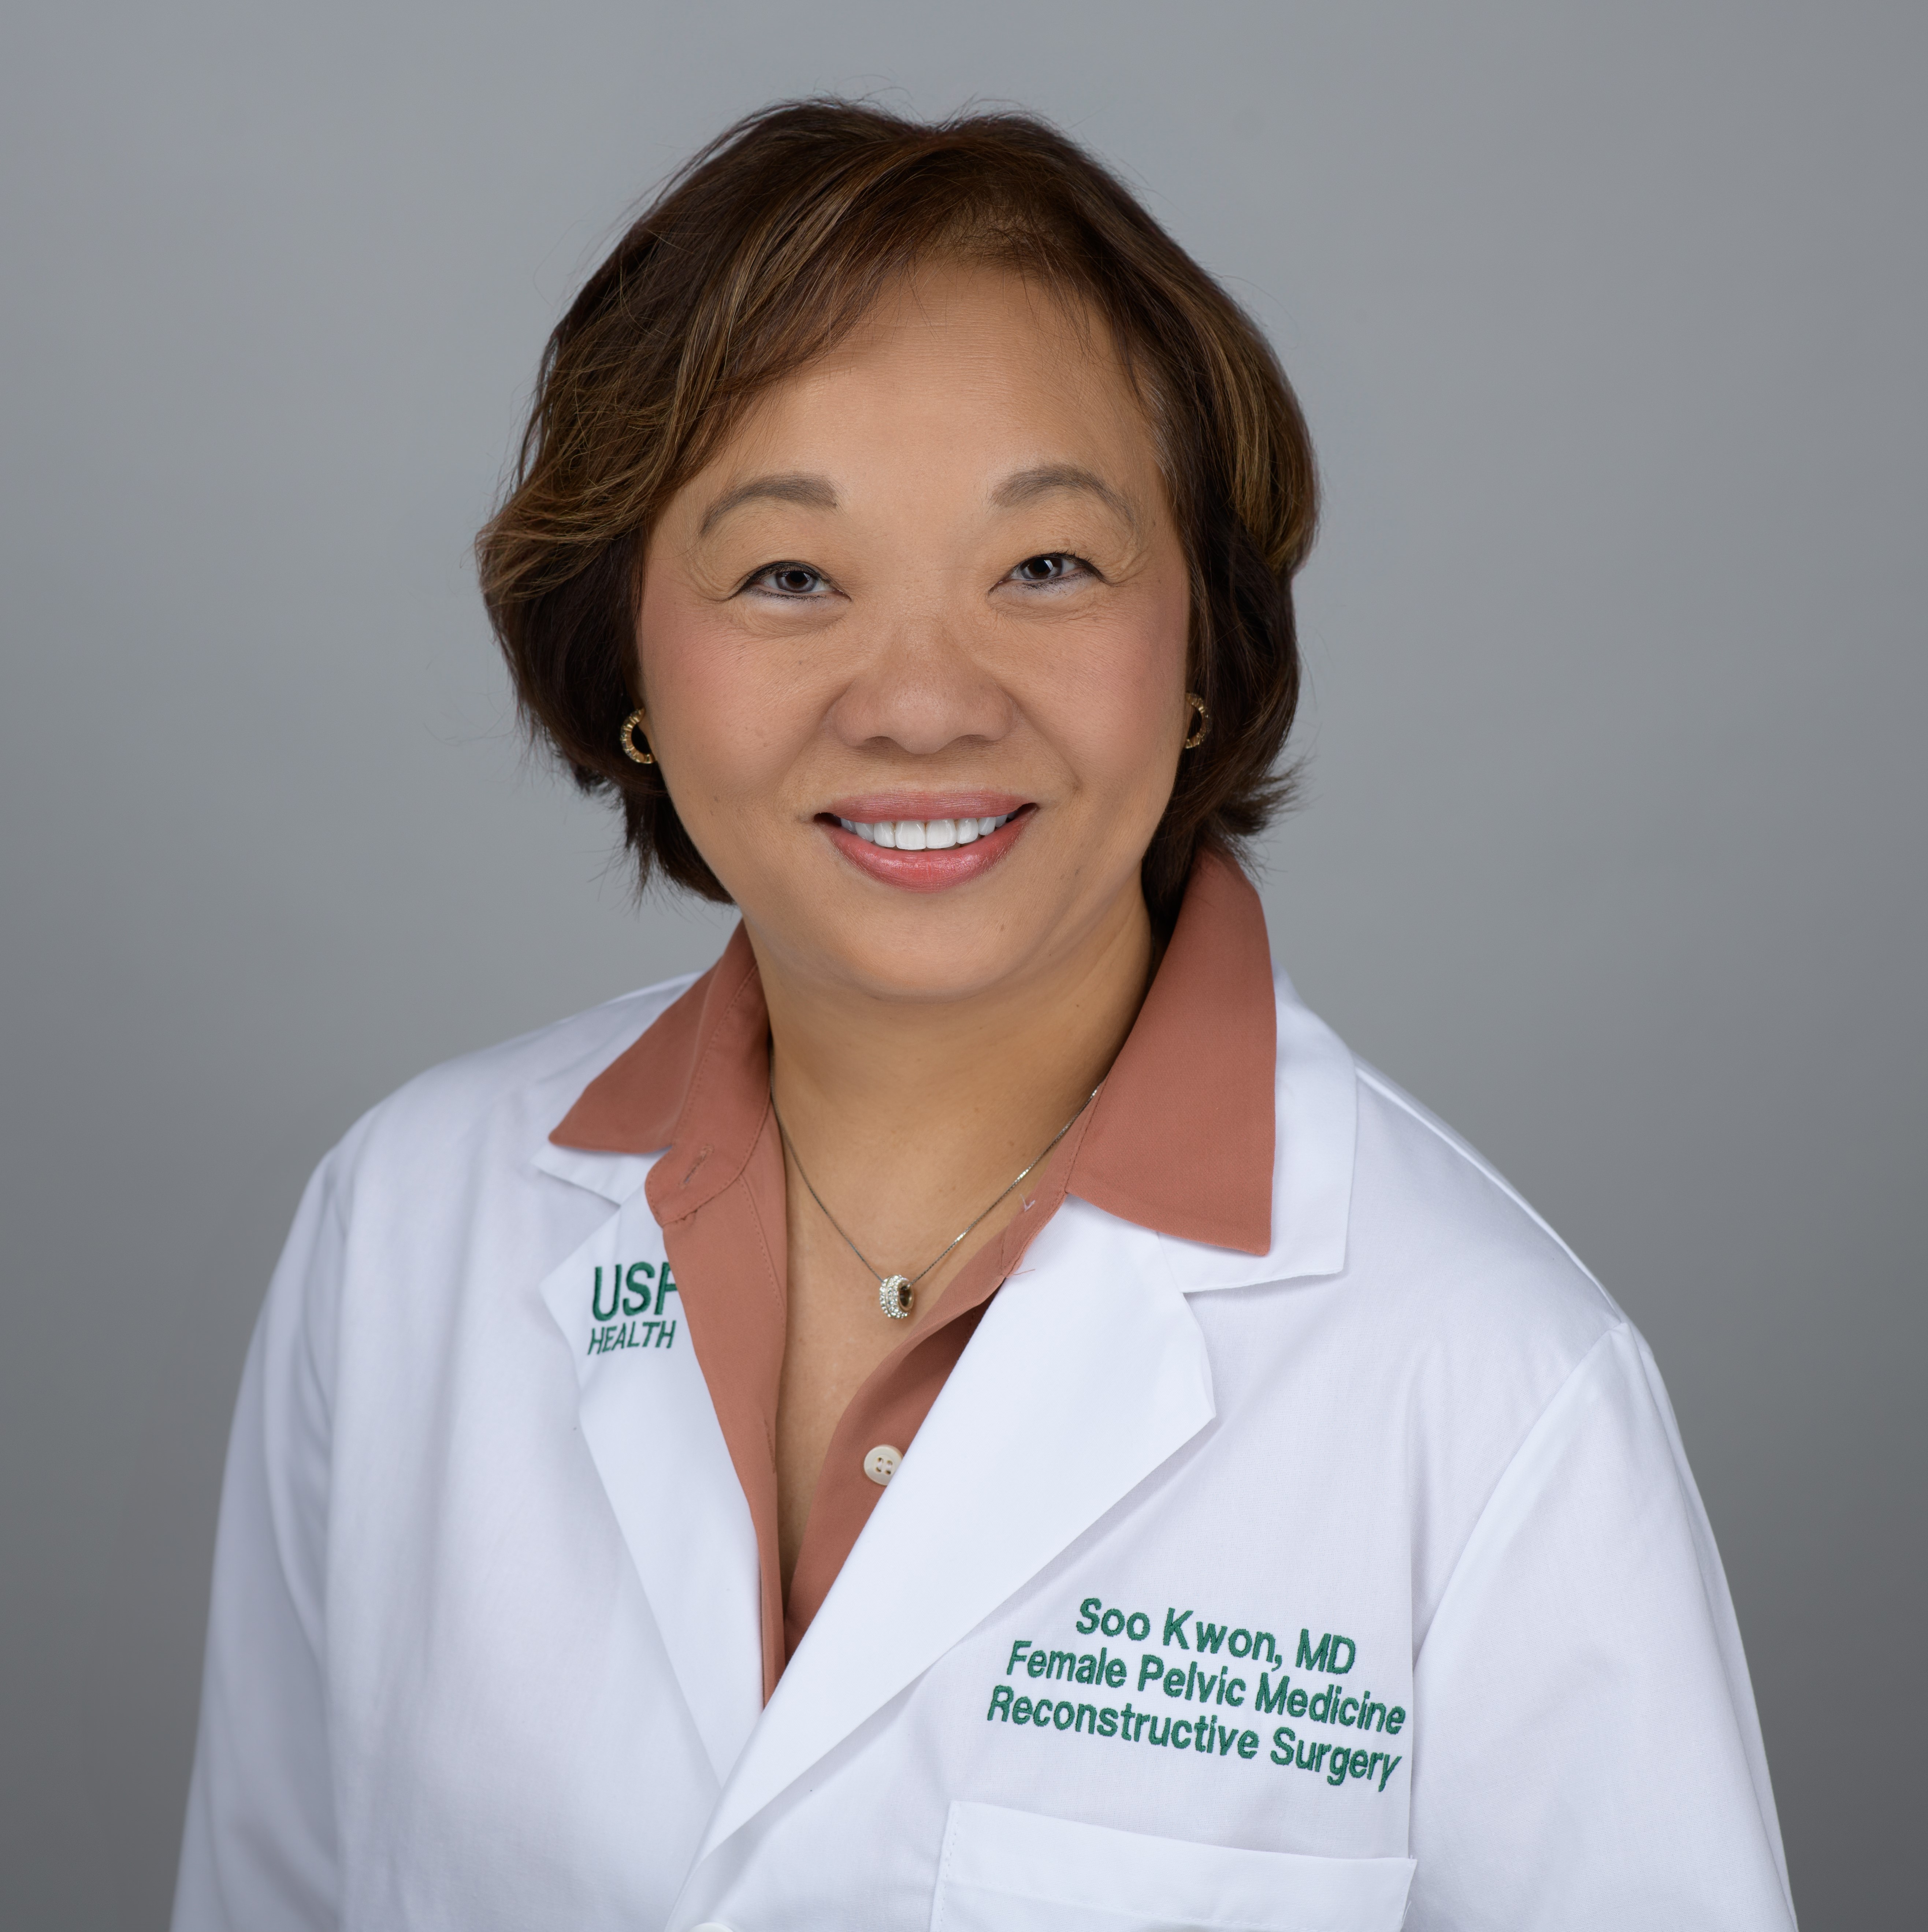 Profile Picture of SOO KWON, MD